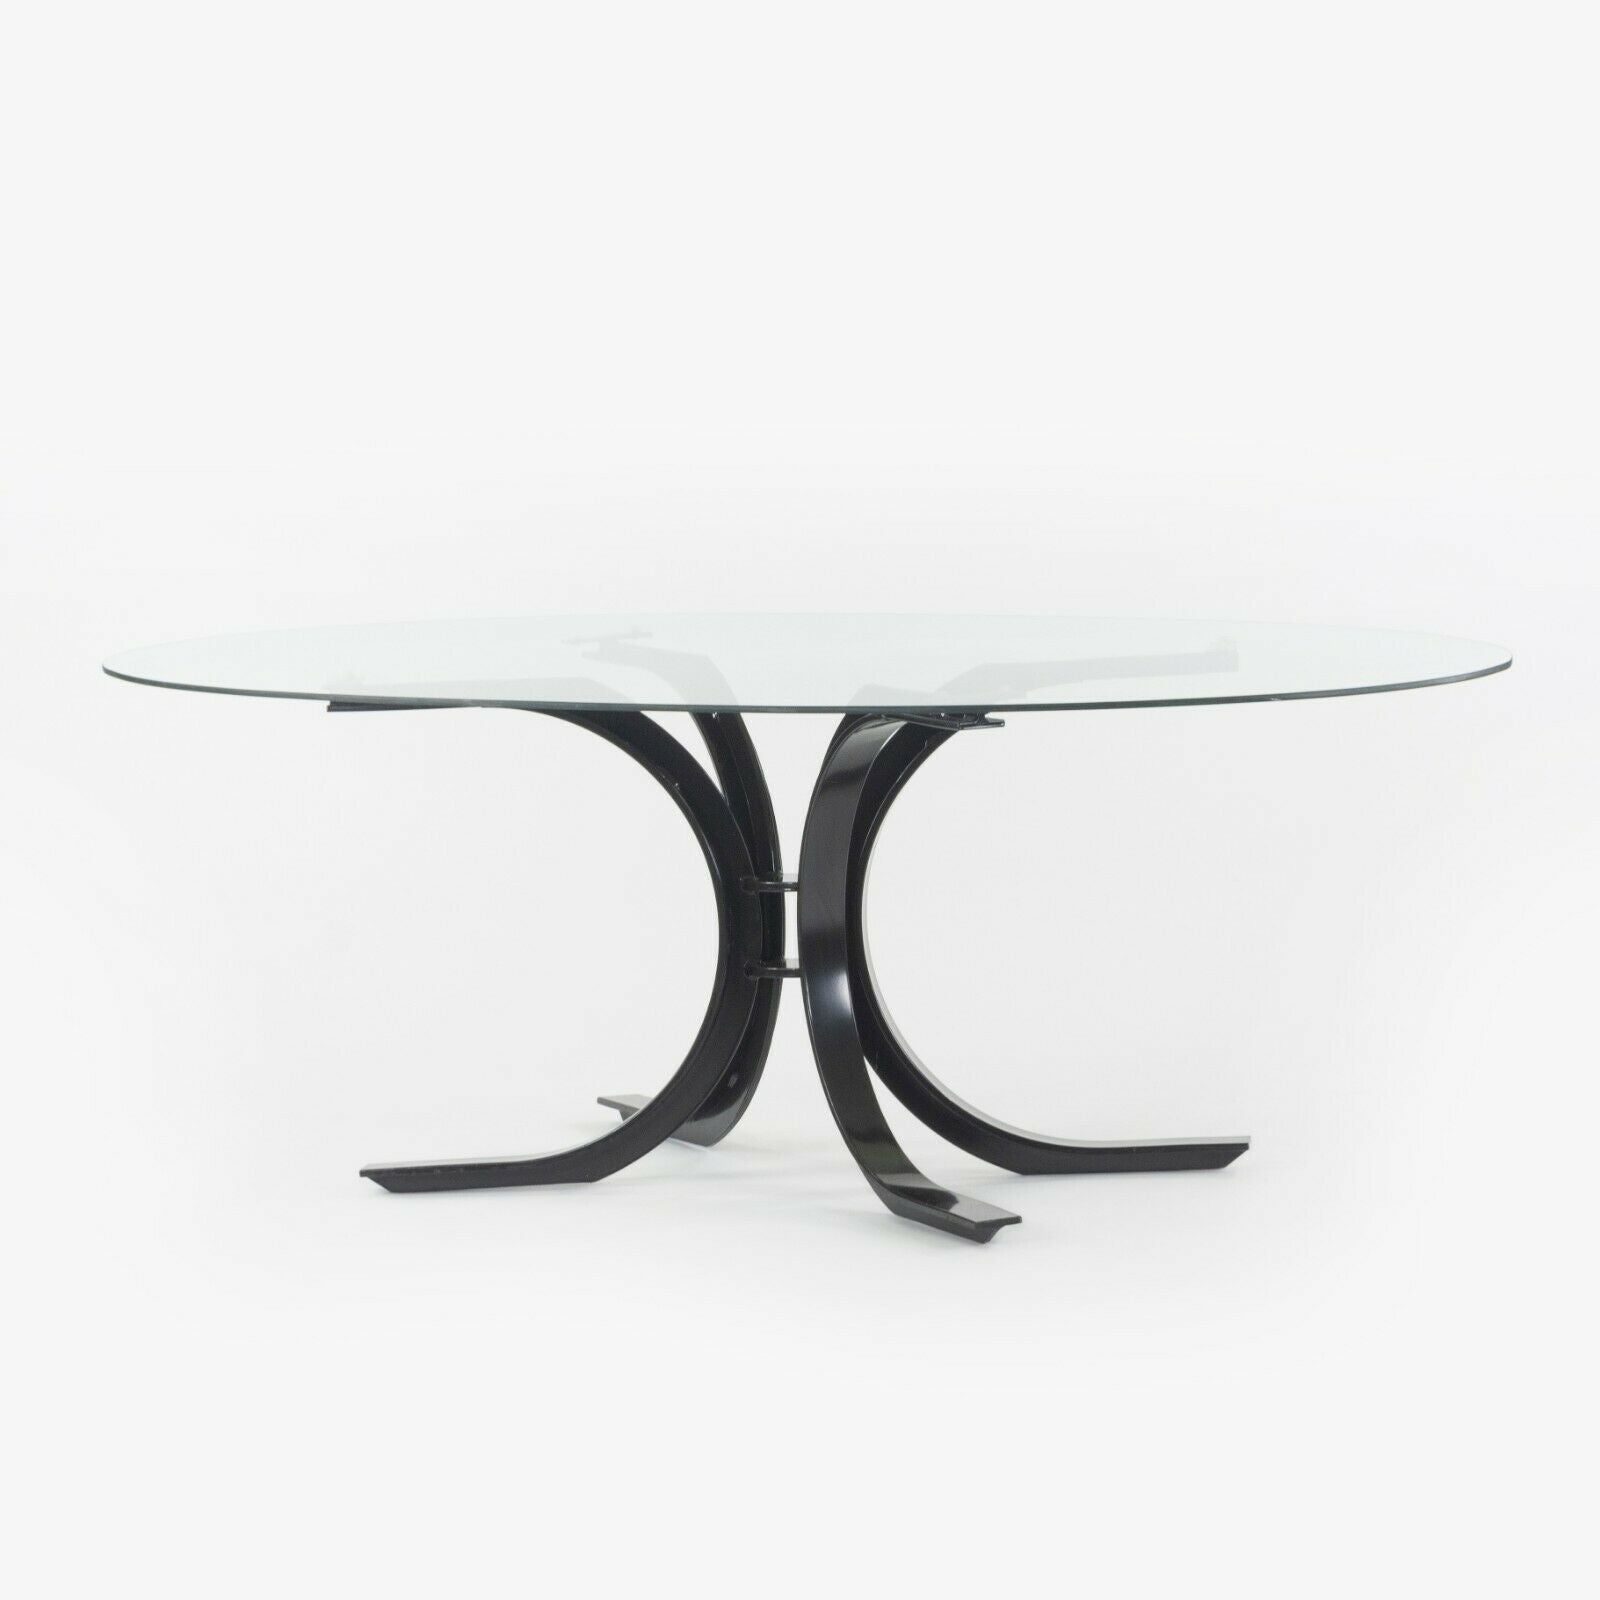 1970s Osvaldo Borsani Dining Table for Stow Davis with Glass Top and Steel Base